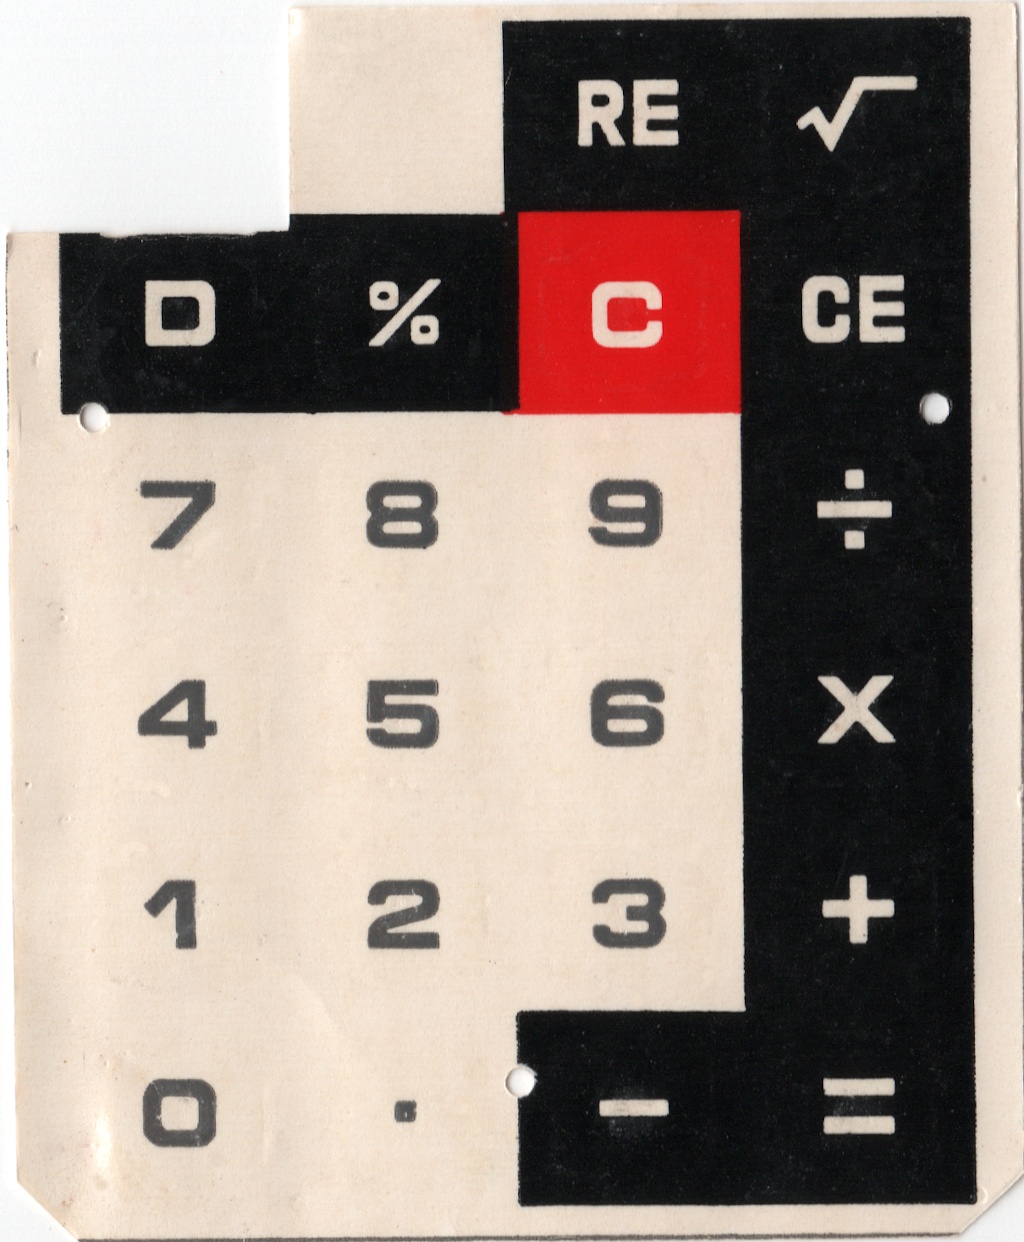 Scan of the keypad backing sheet for a Prinztronic Mini 7